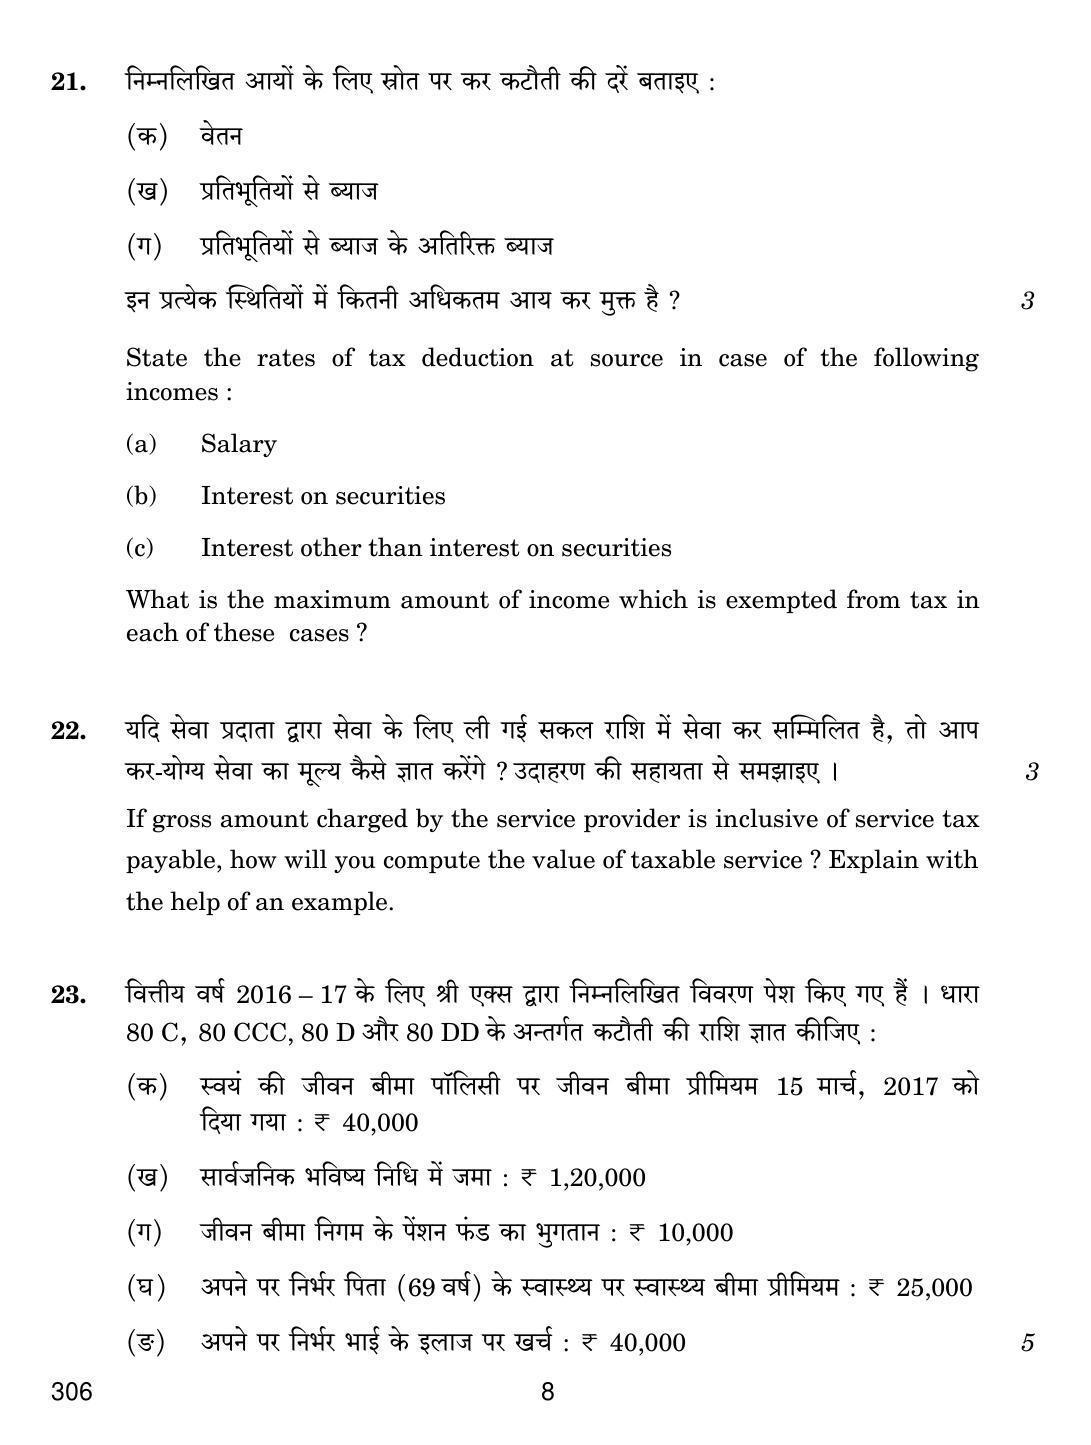 CBSE Class 12 306 TAXATION 2018 Question Paper - Page 8